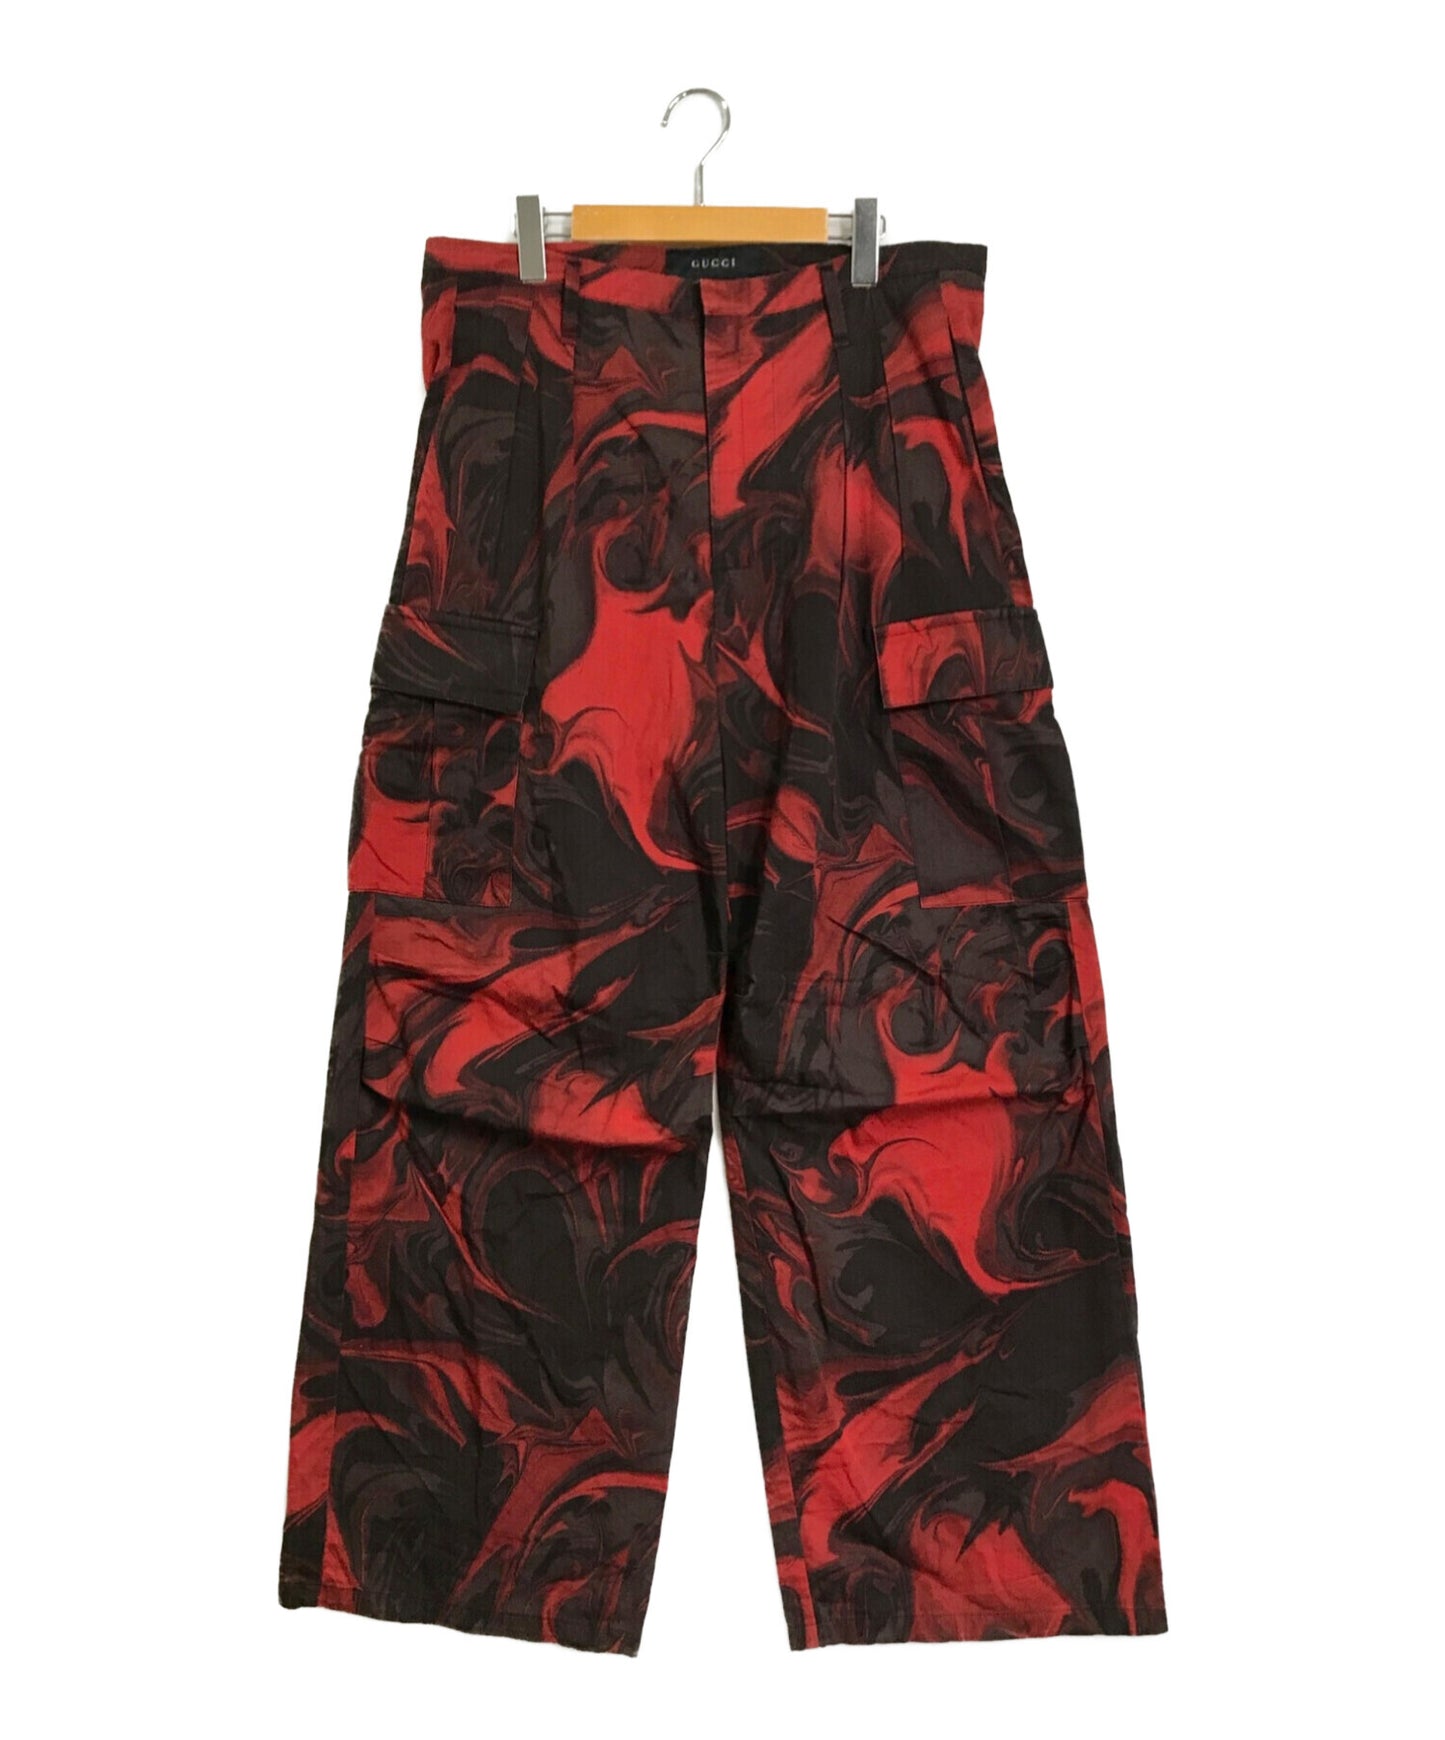 GUCCI marbled wide pants